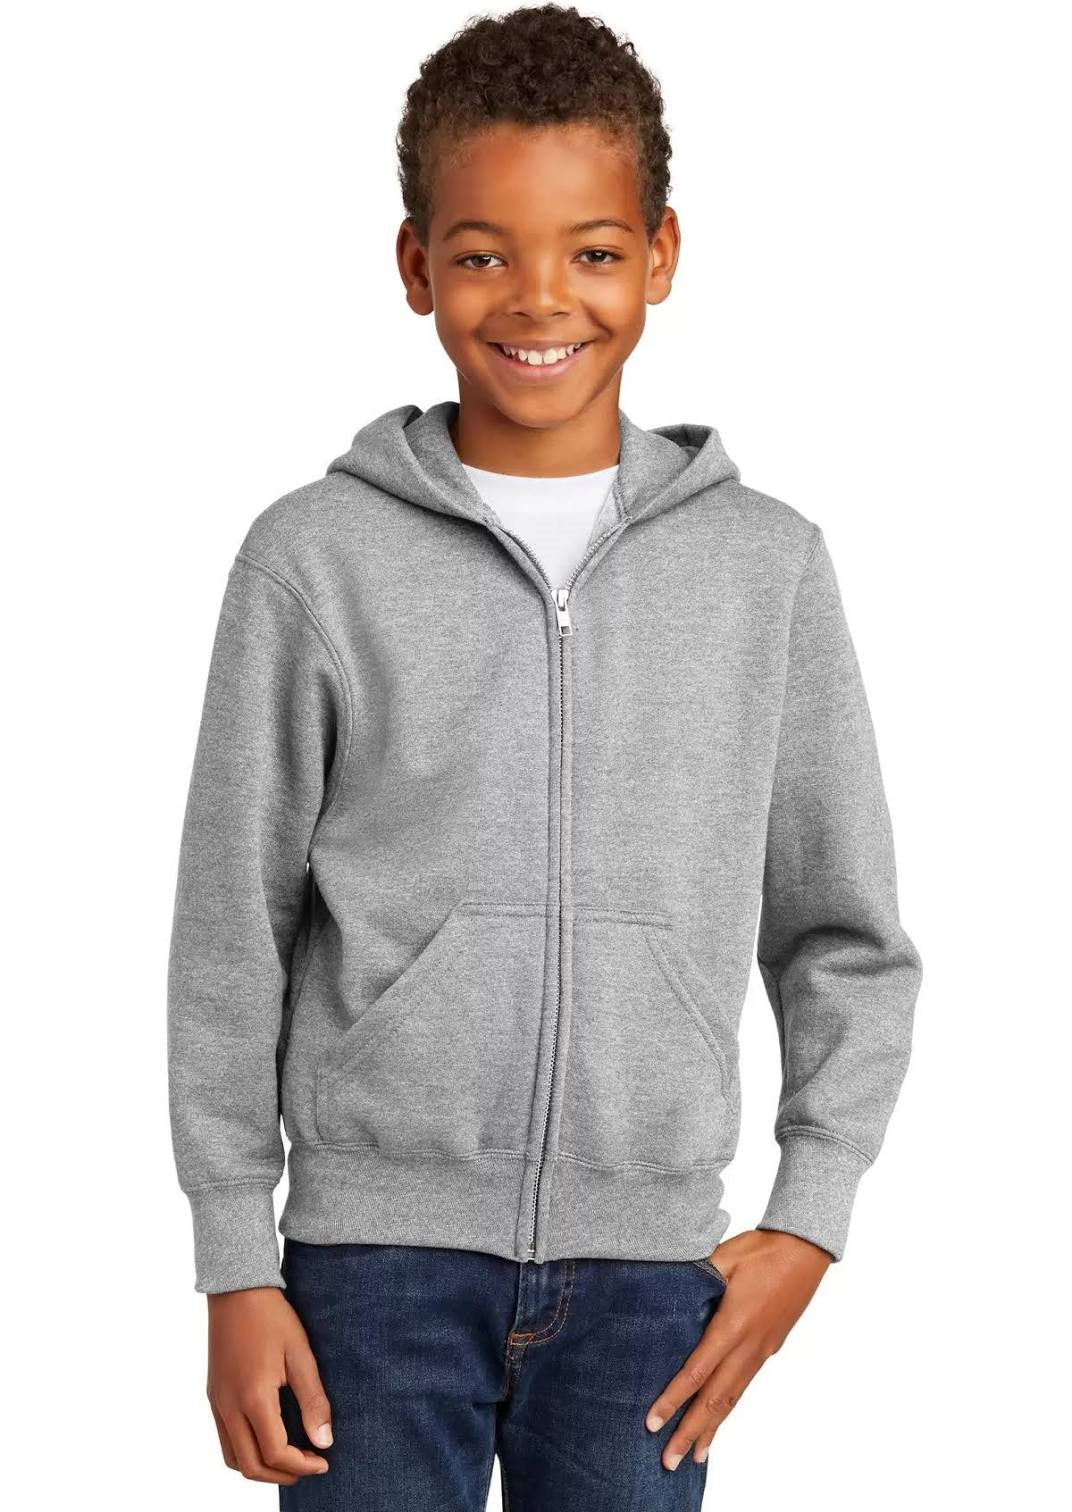 Kids 2 Pack Sweaters - Grey Red